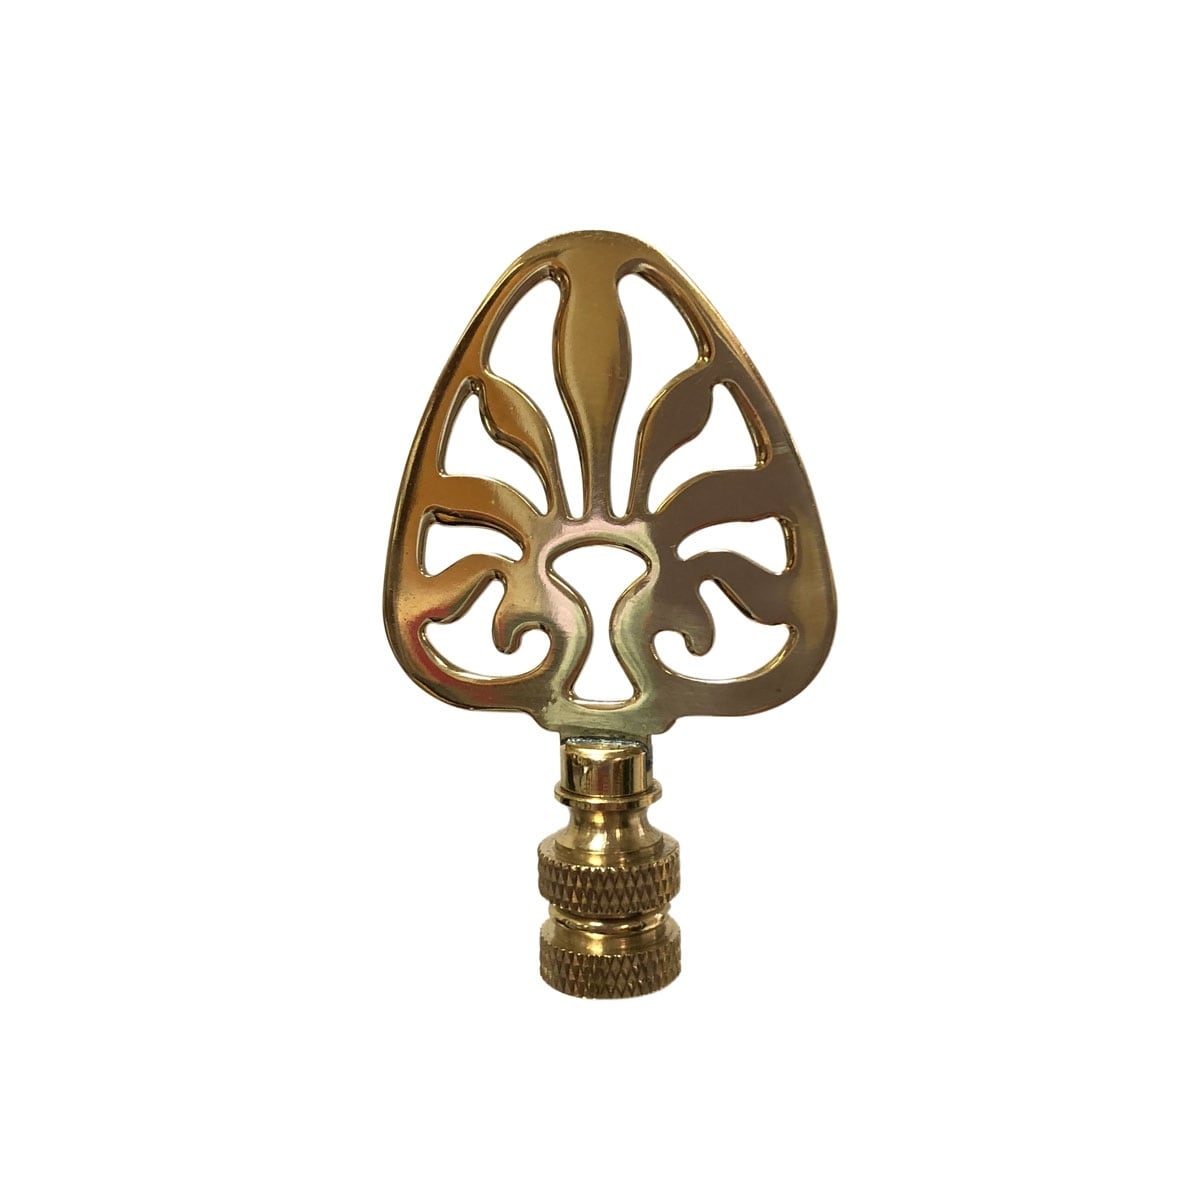 Royal Designs Seashell Lamp Finial for Lamp Shade, 2 Inch, Polished Brass 